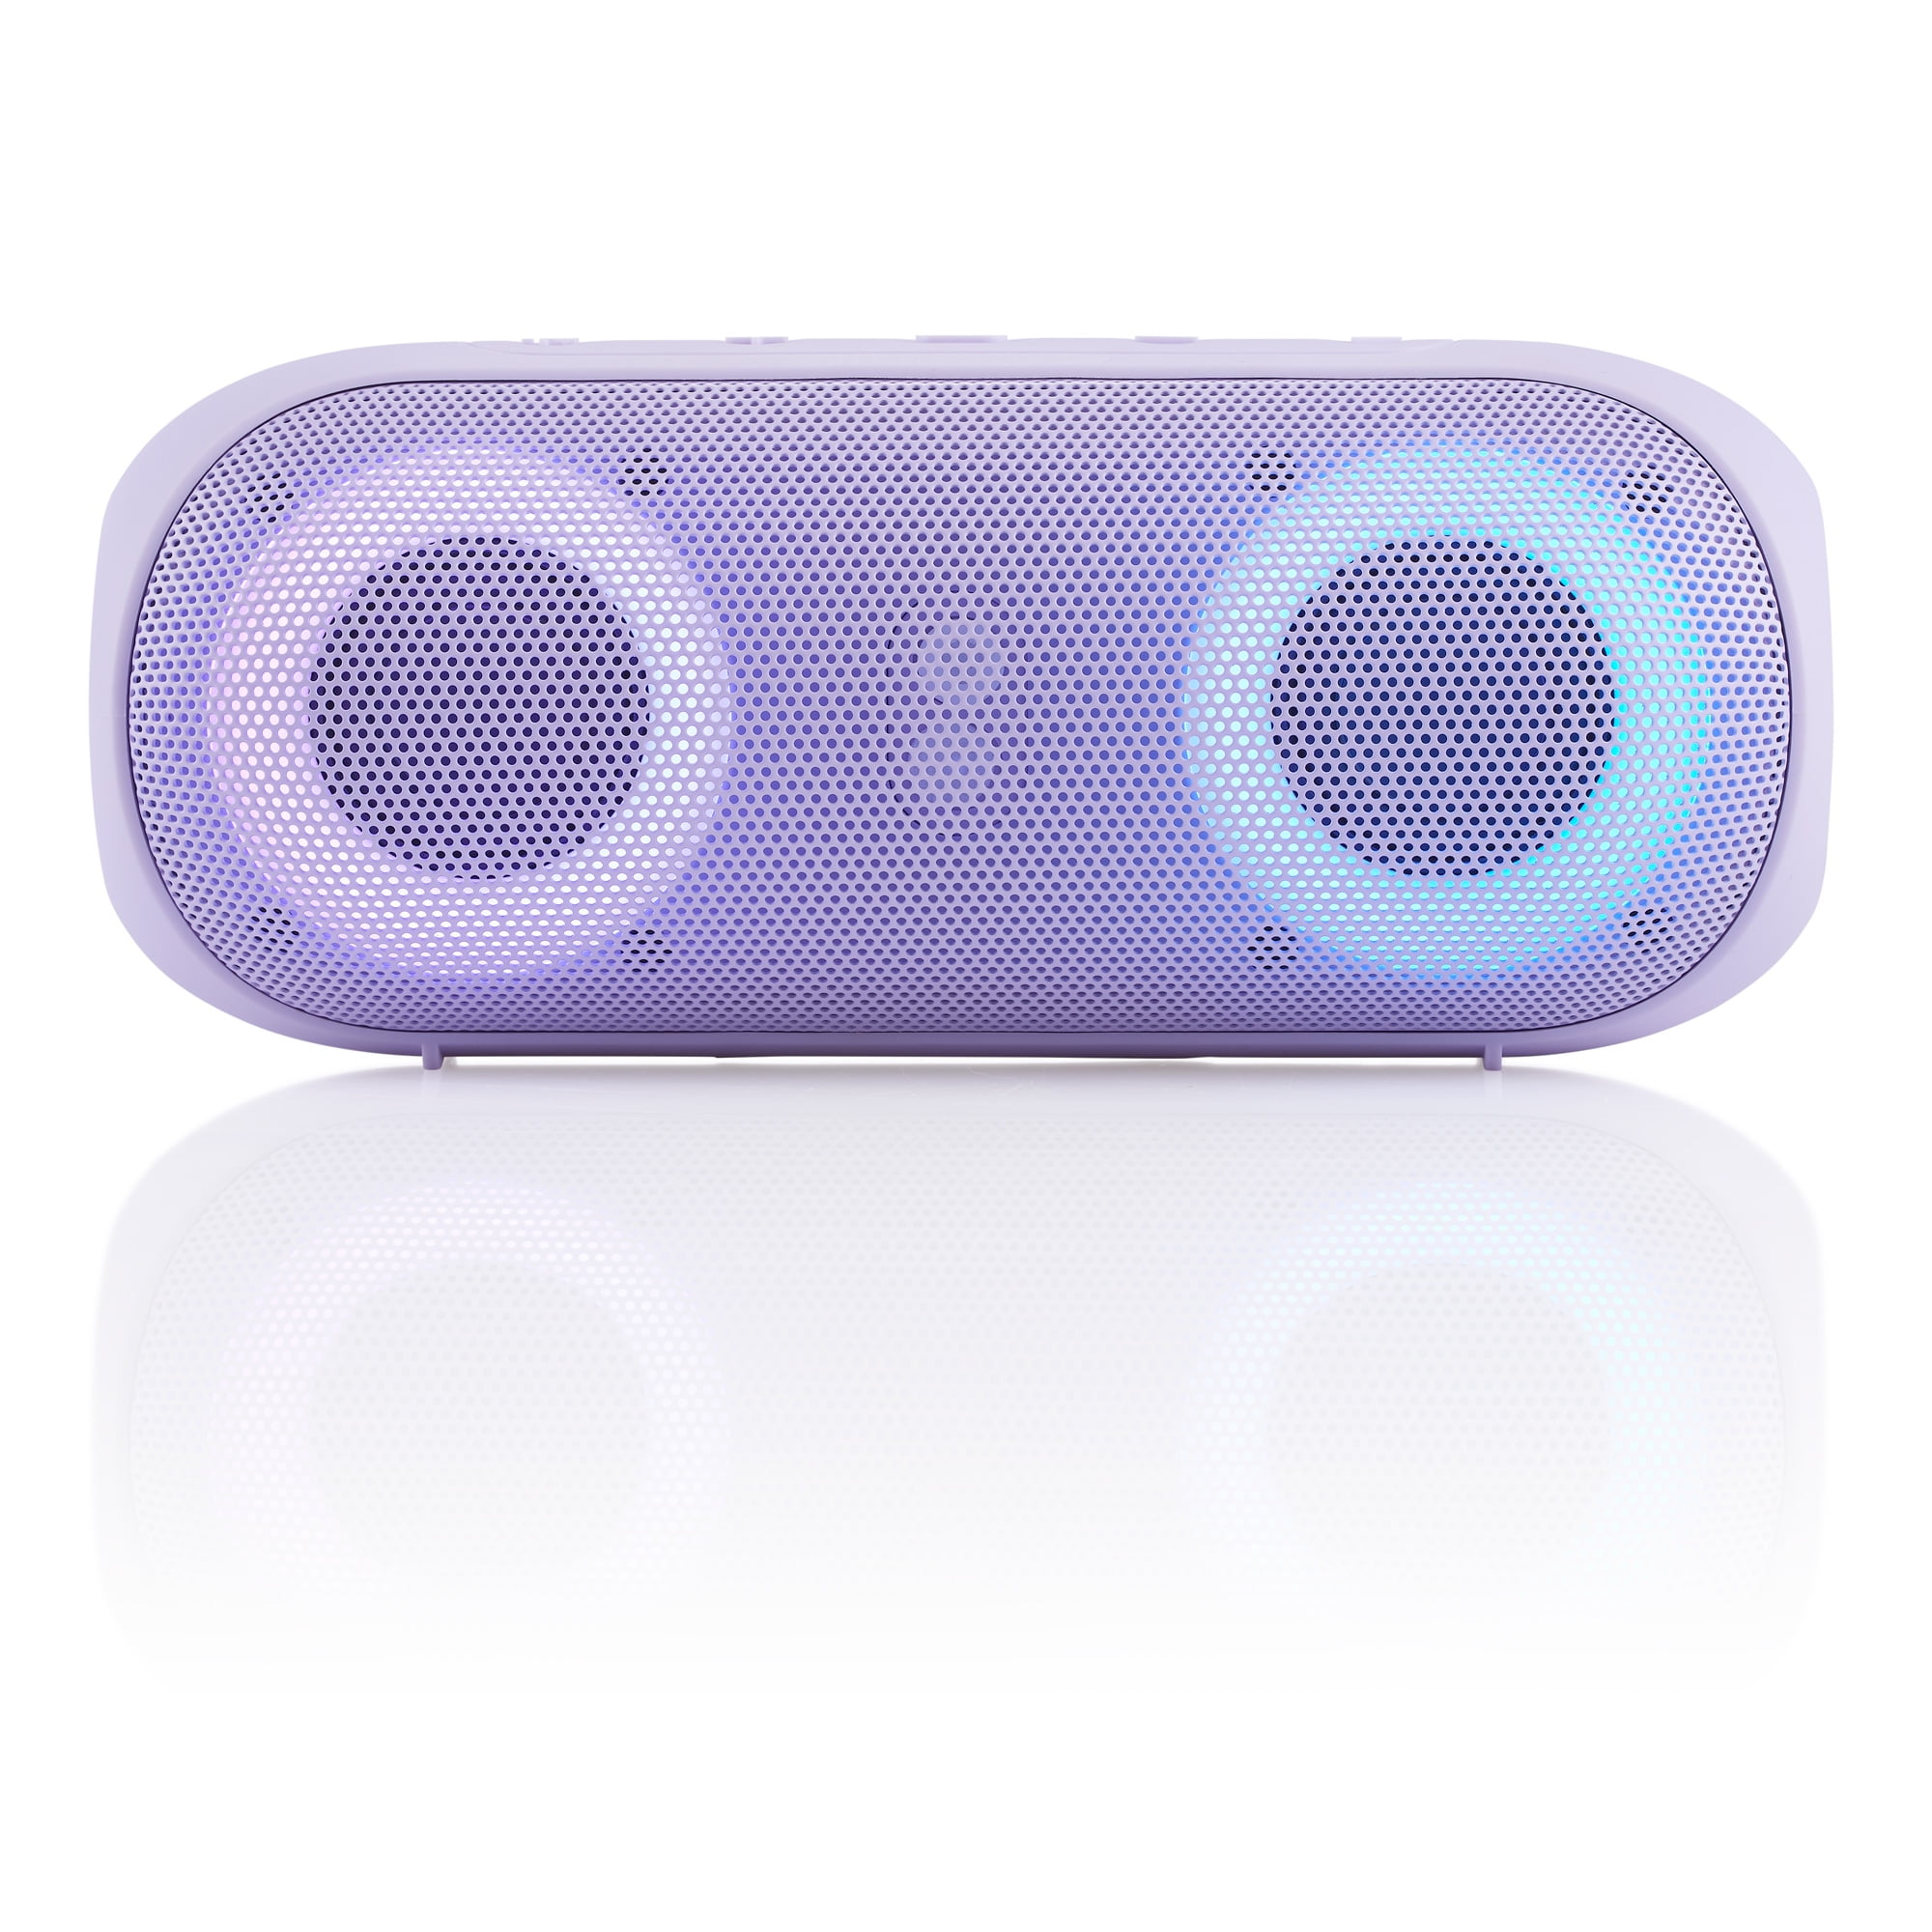 onn. Wireless Bluetooth Speaker with LED Lighting, Lilac